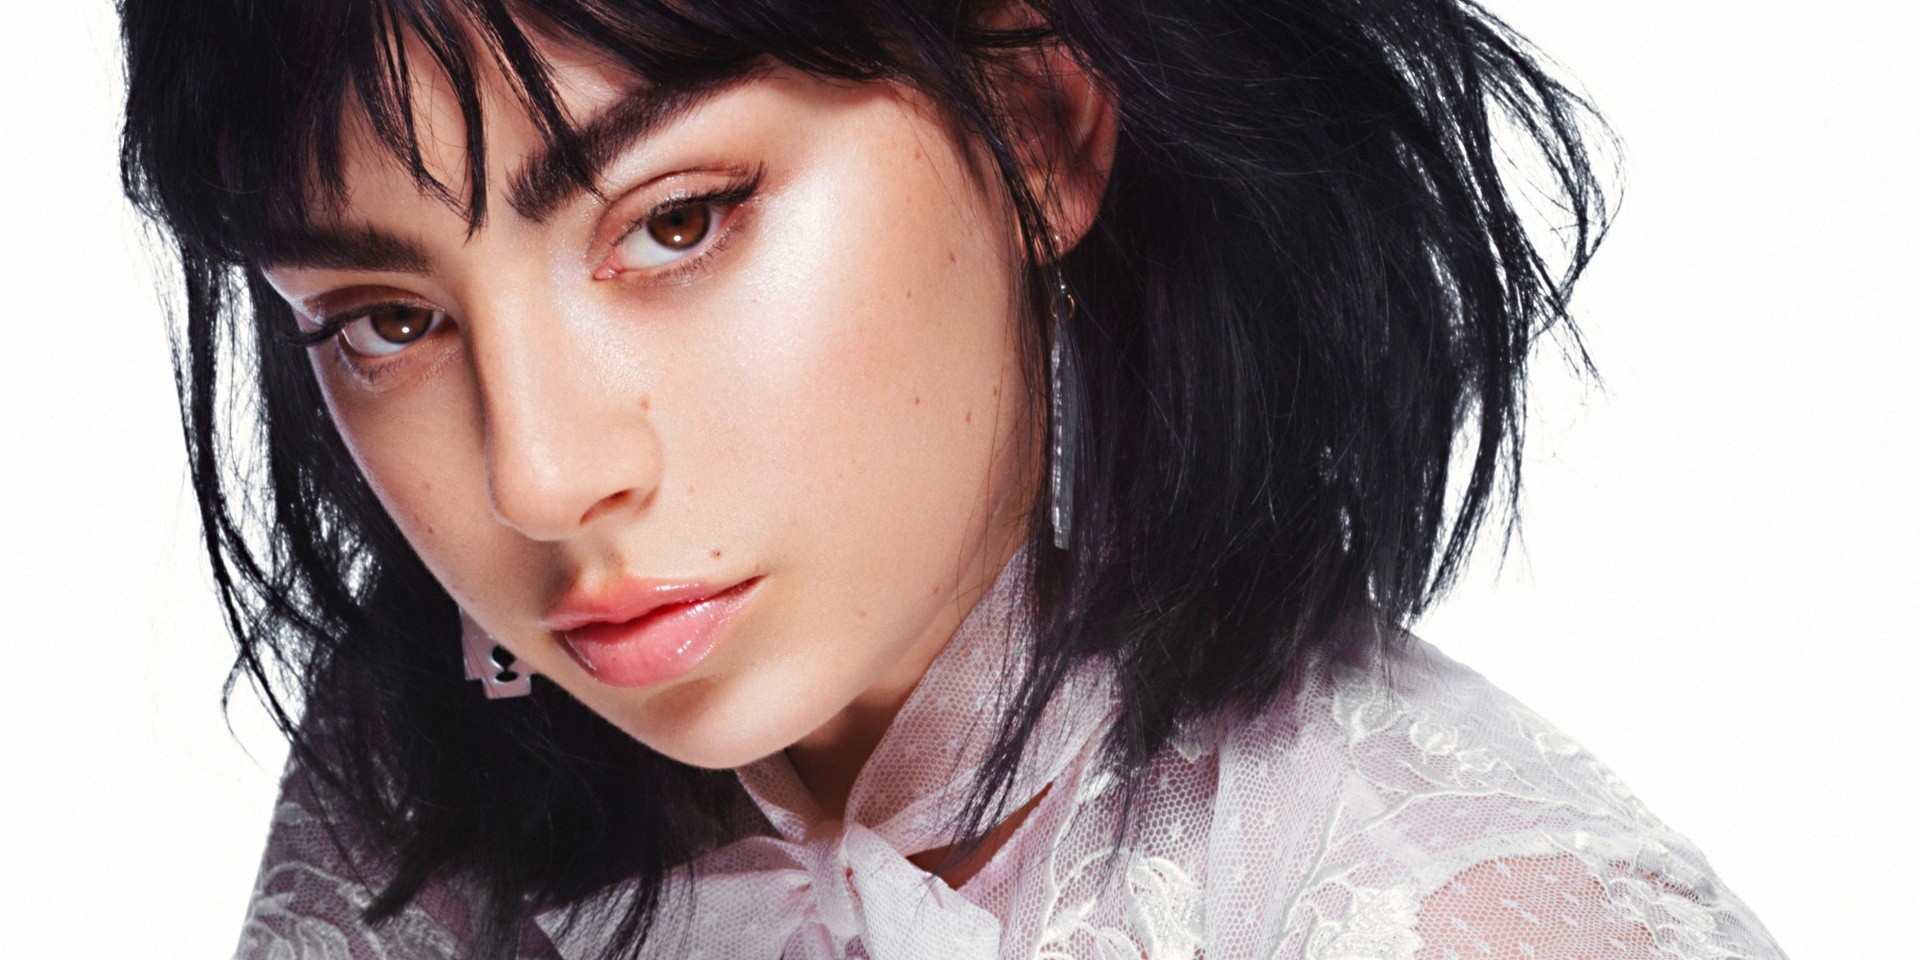 Charli XCX's got bars on swaggering new song '5 In The Morning' – listen